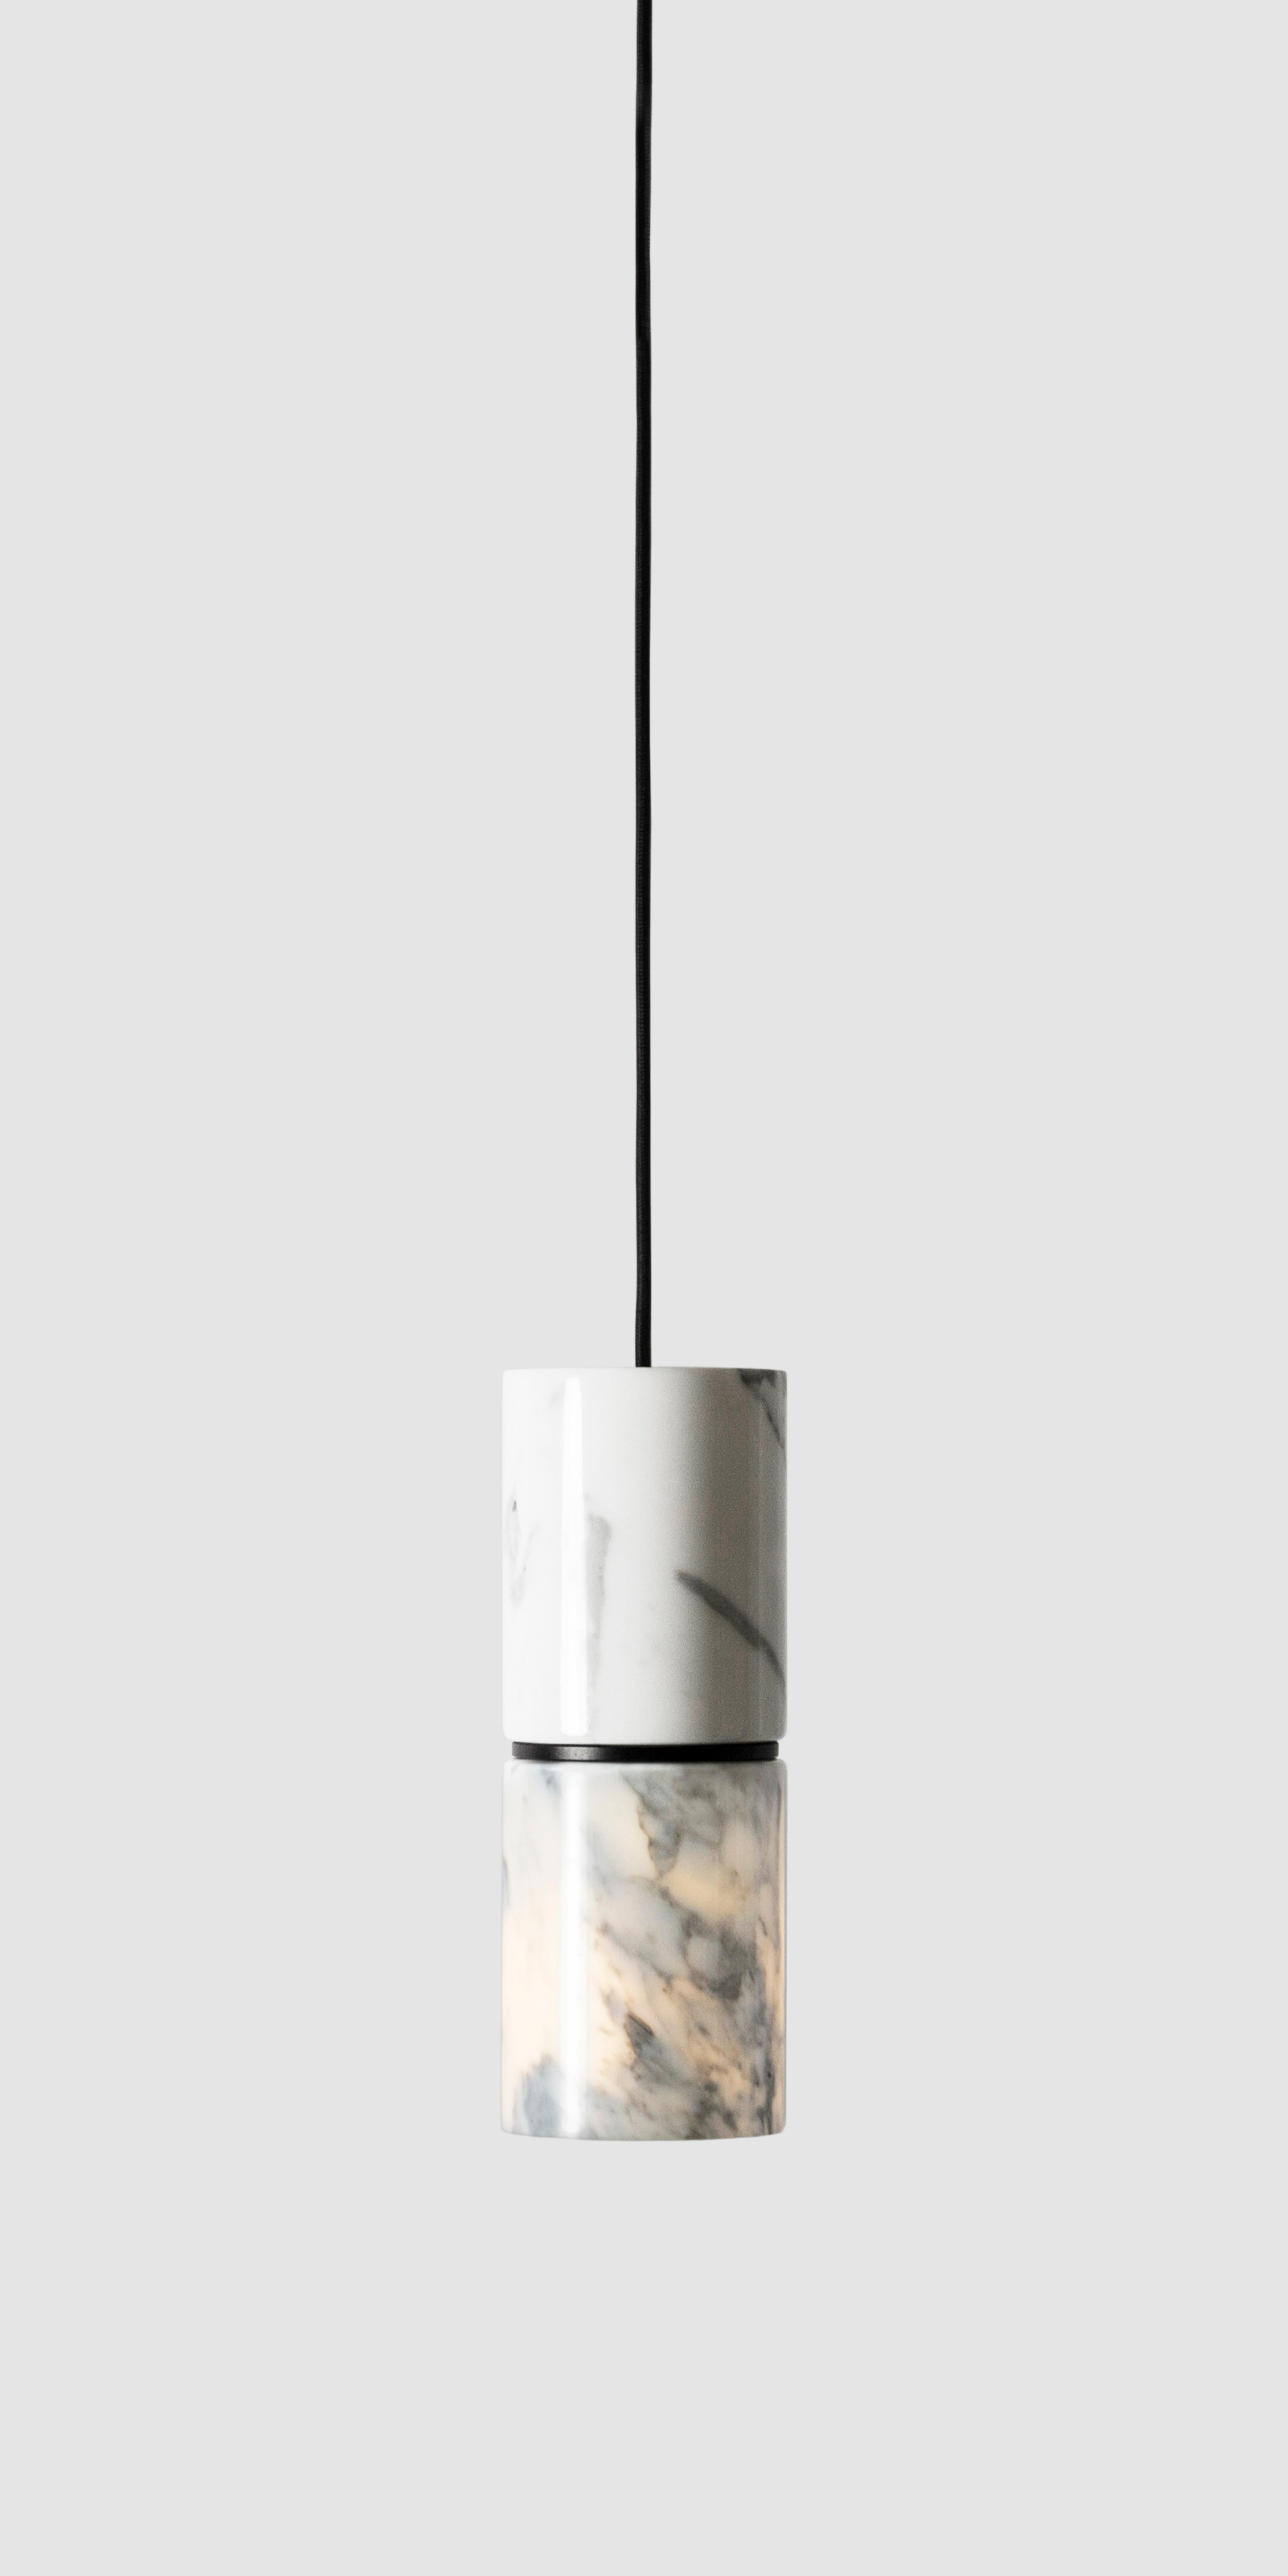 Pendant lamp 'RI' by Buzao x Bentu Design. 
Black lava stone and white marble versions available.

(Sold individually)

Measures: 26.5 cm high, 10 cm diameter
Wire: 2 meters black (adjustable)

Brass (gold) or aluminum (black) finish.

Lamp type: